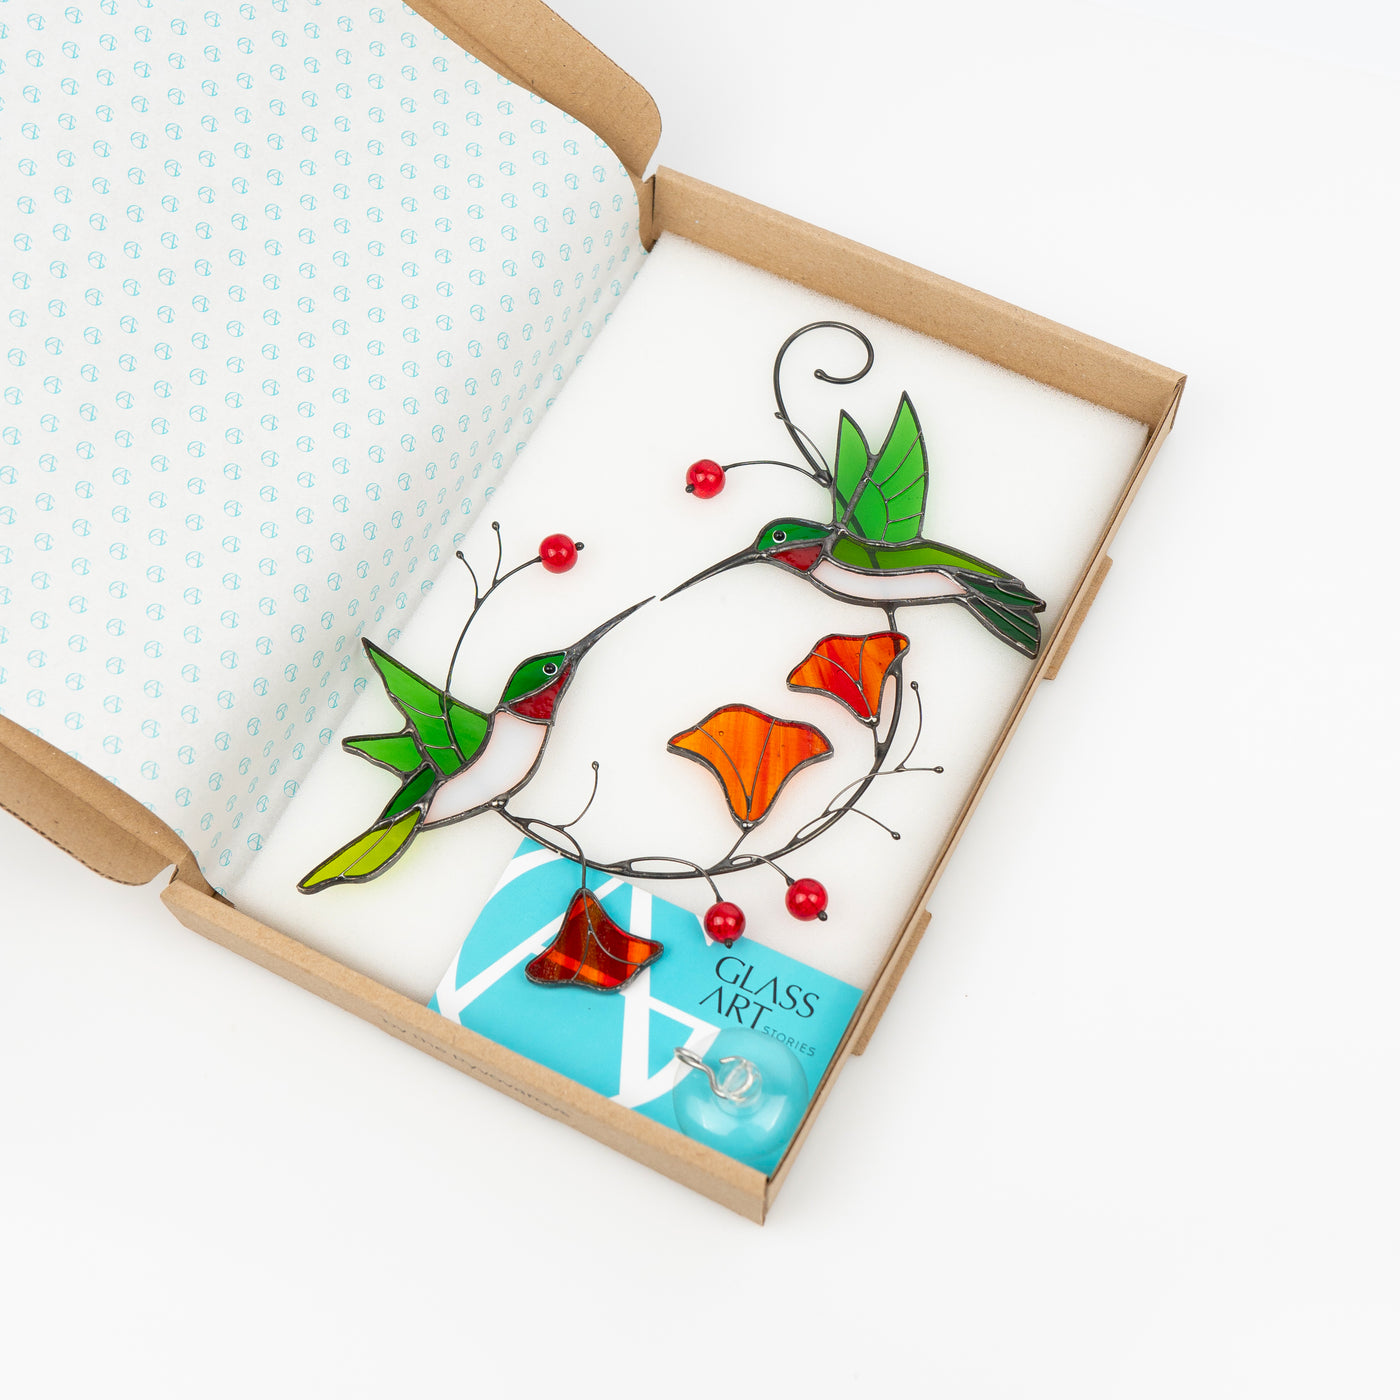 Stained glass couple of green hummingbirds in a brand box